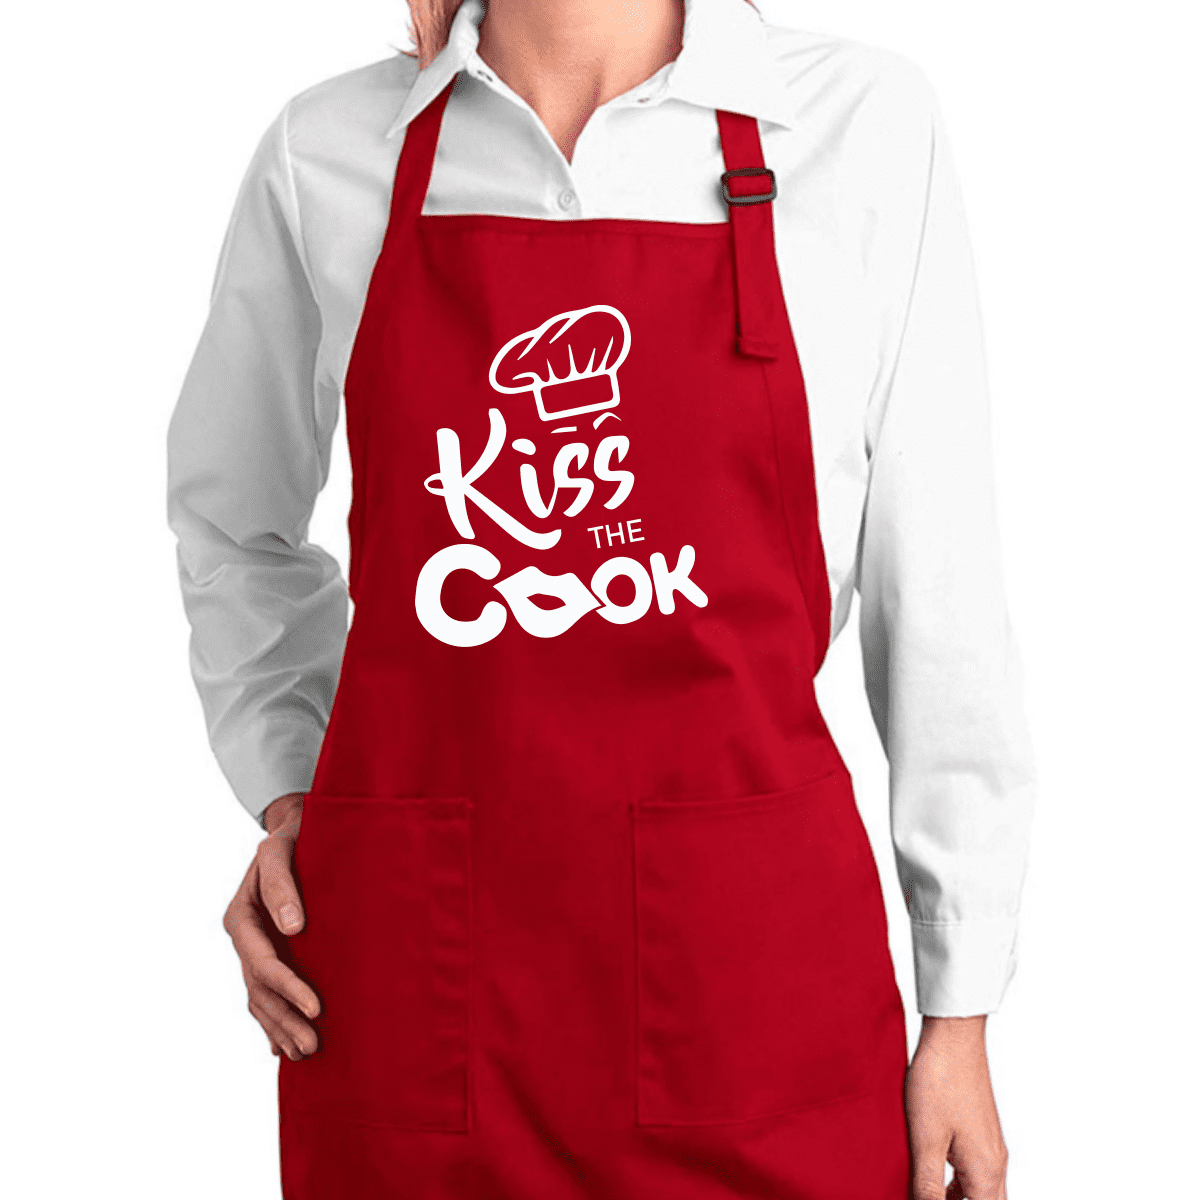 Kiss The Cook Funny Classic Kitchen Cooking Apron With Pockets Kitchen Cooking Apron Graphic 